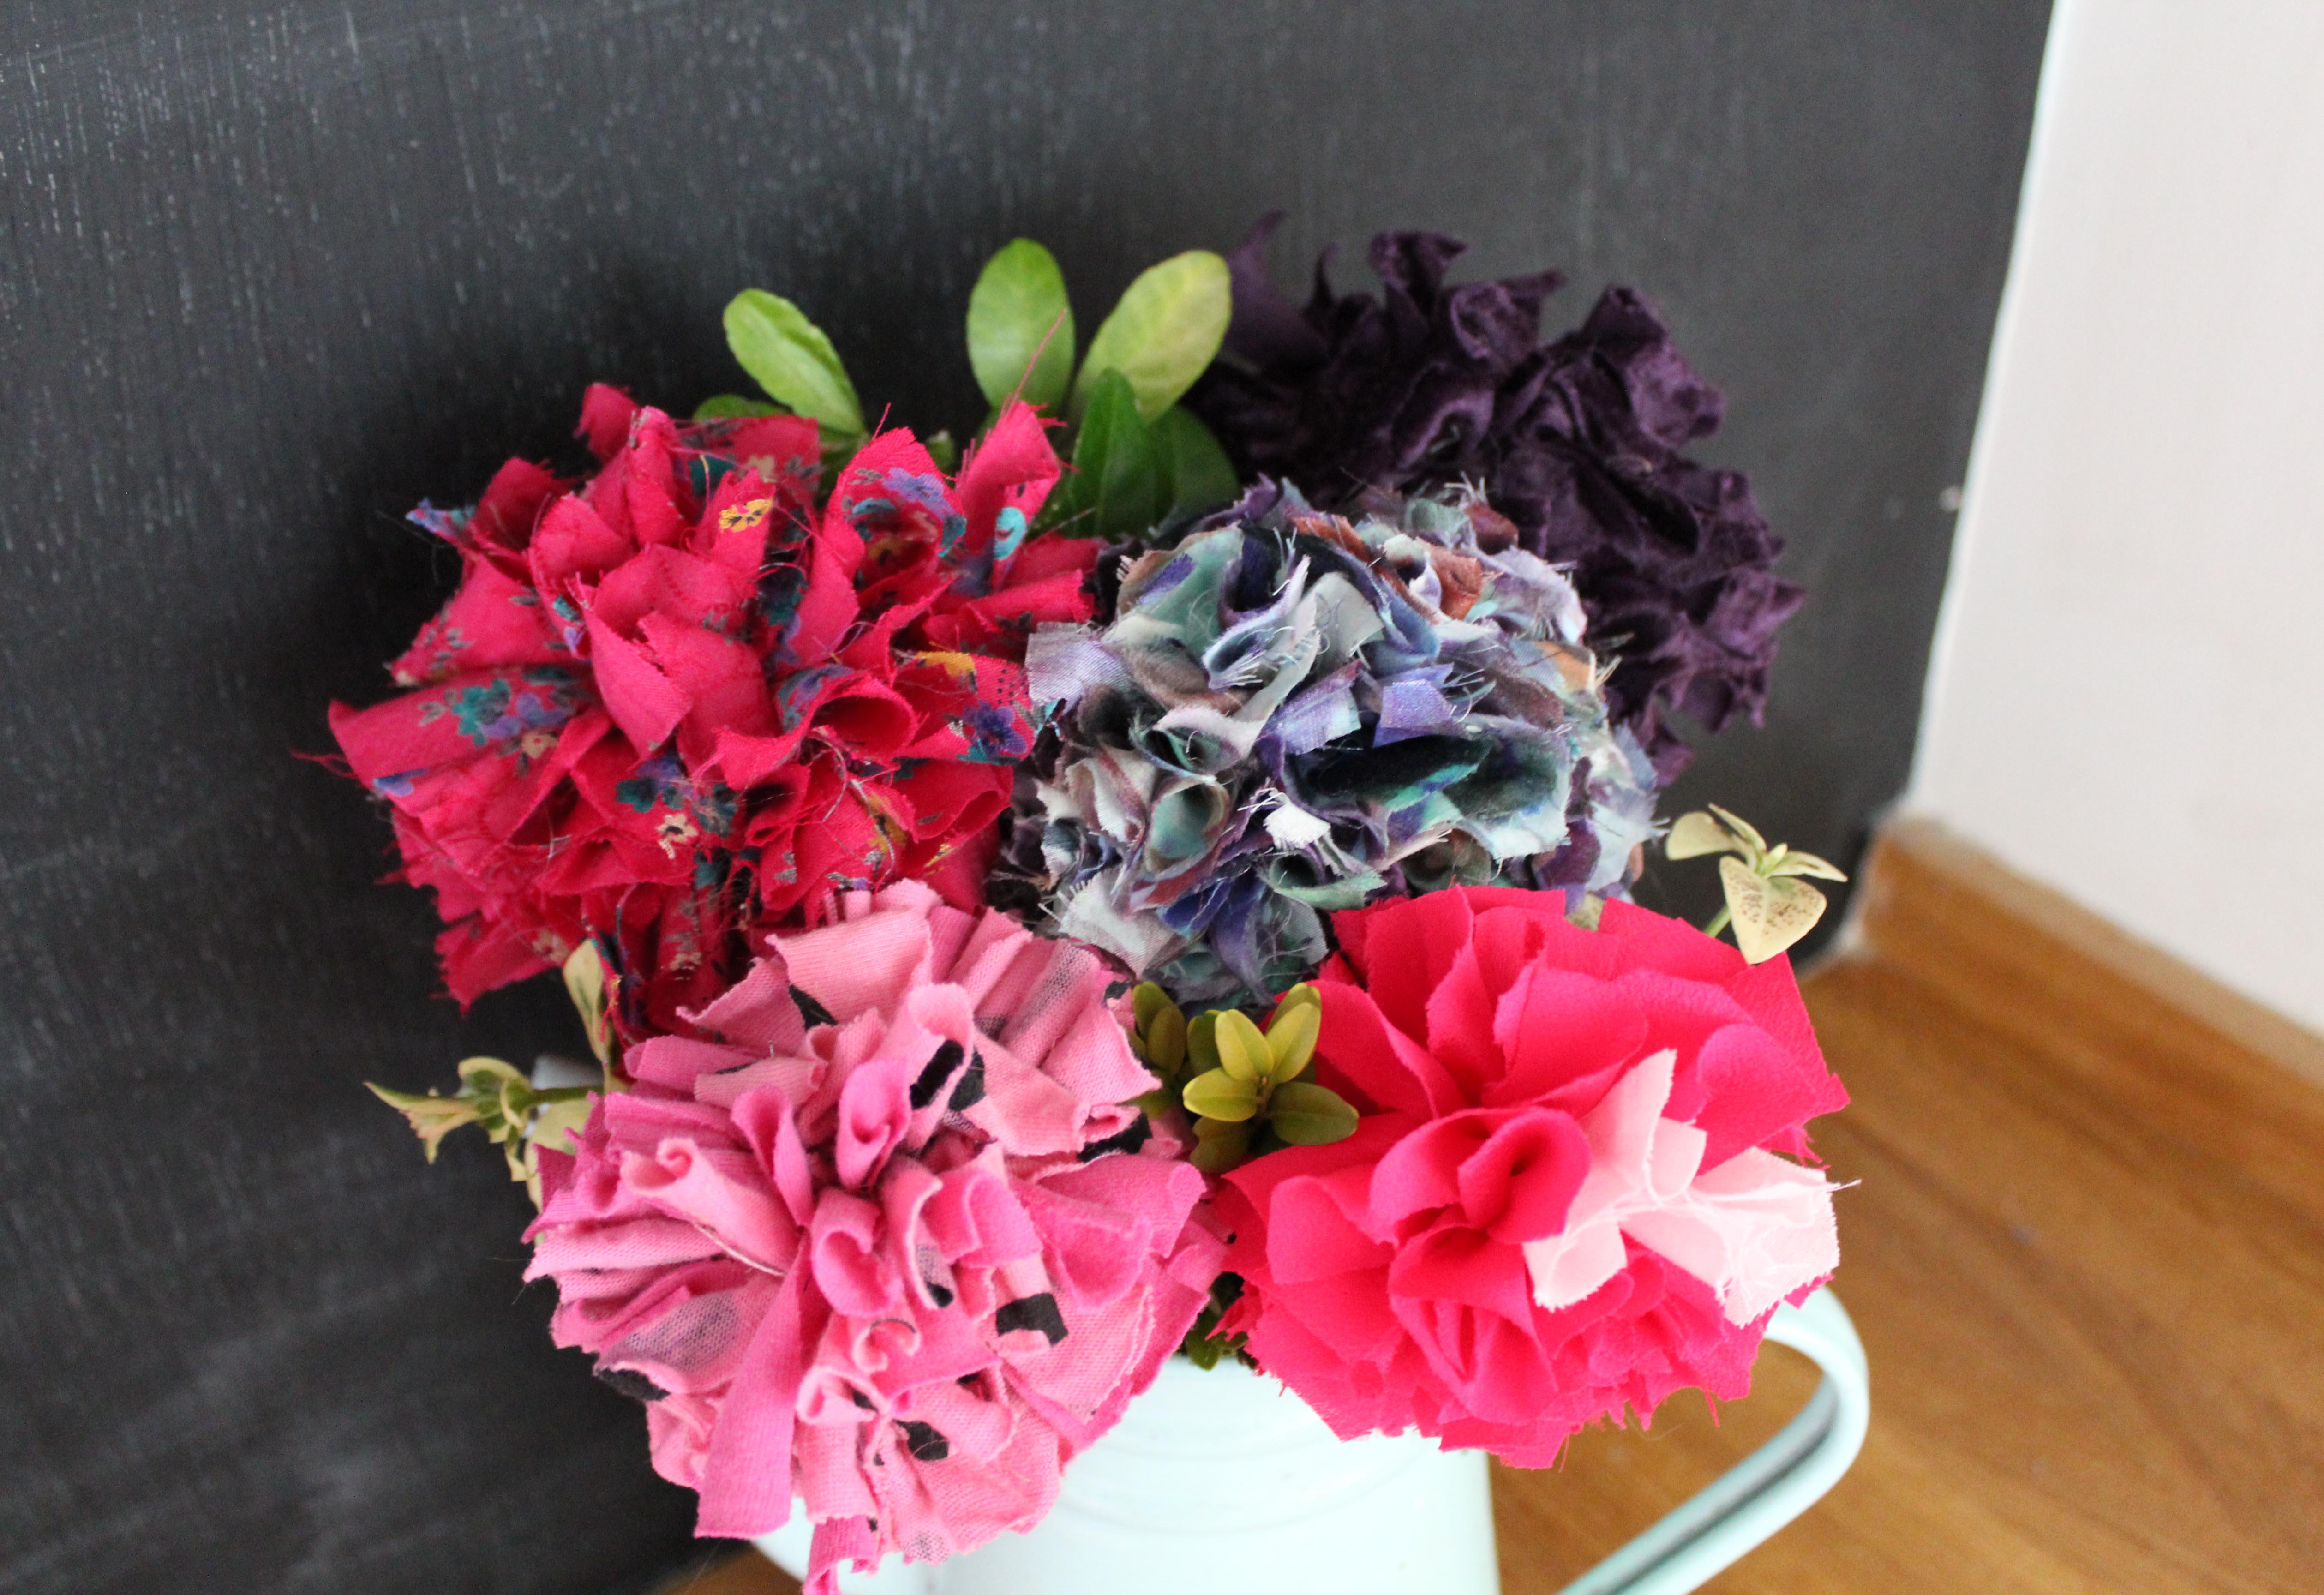 Rag rug fabric flowers made from recycled clothing in a bouquet